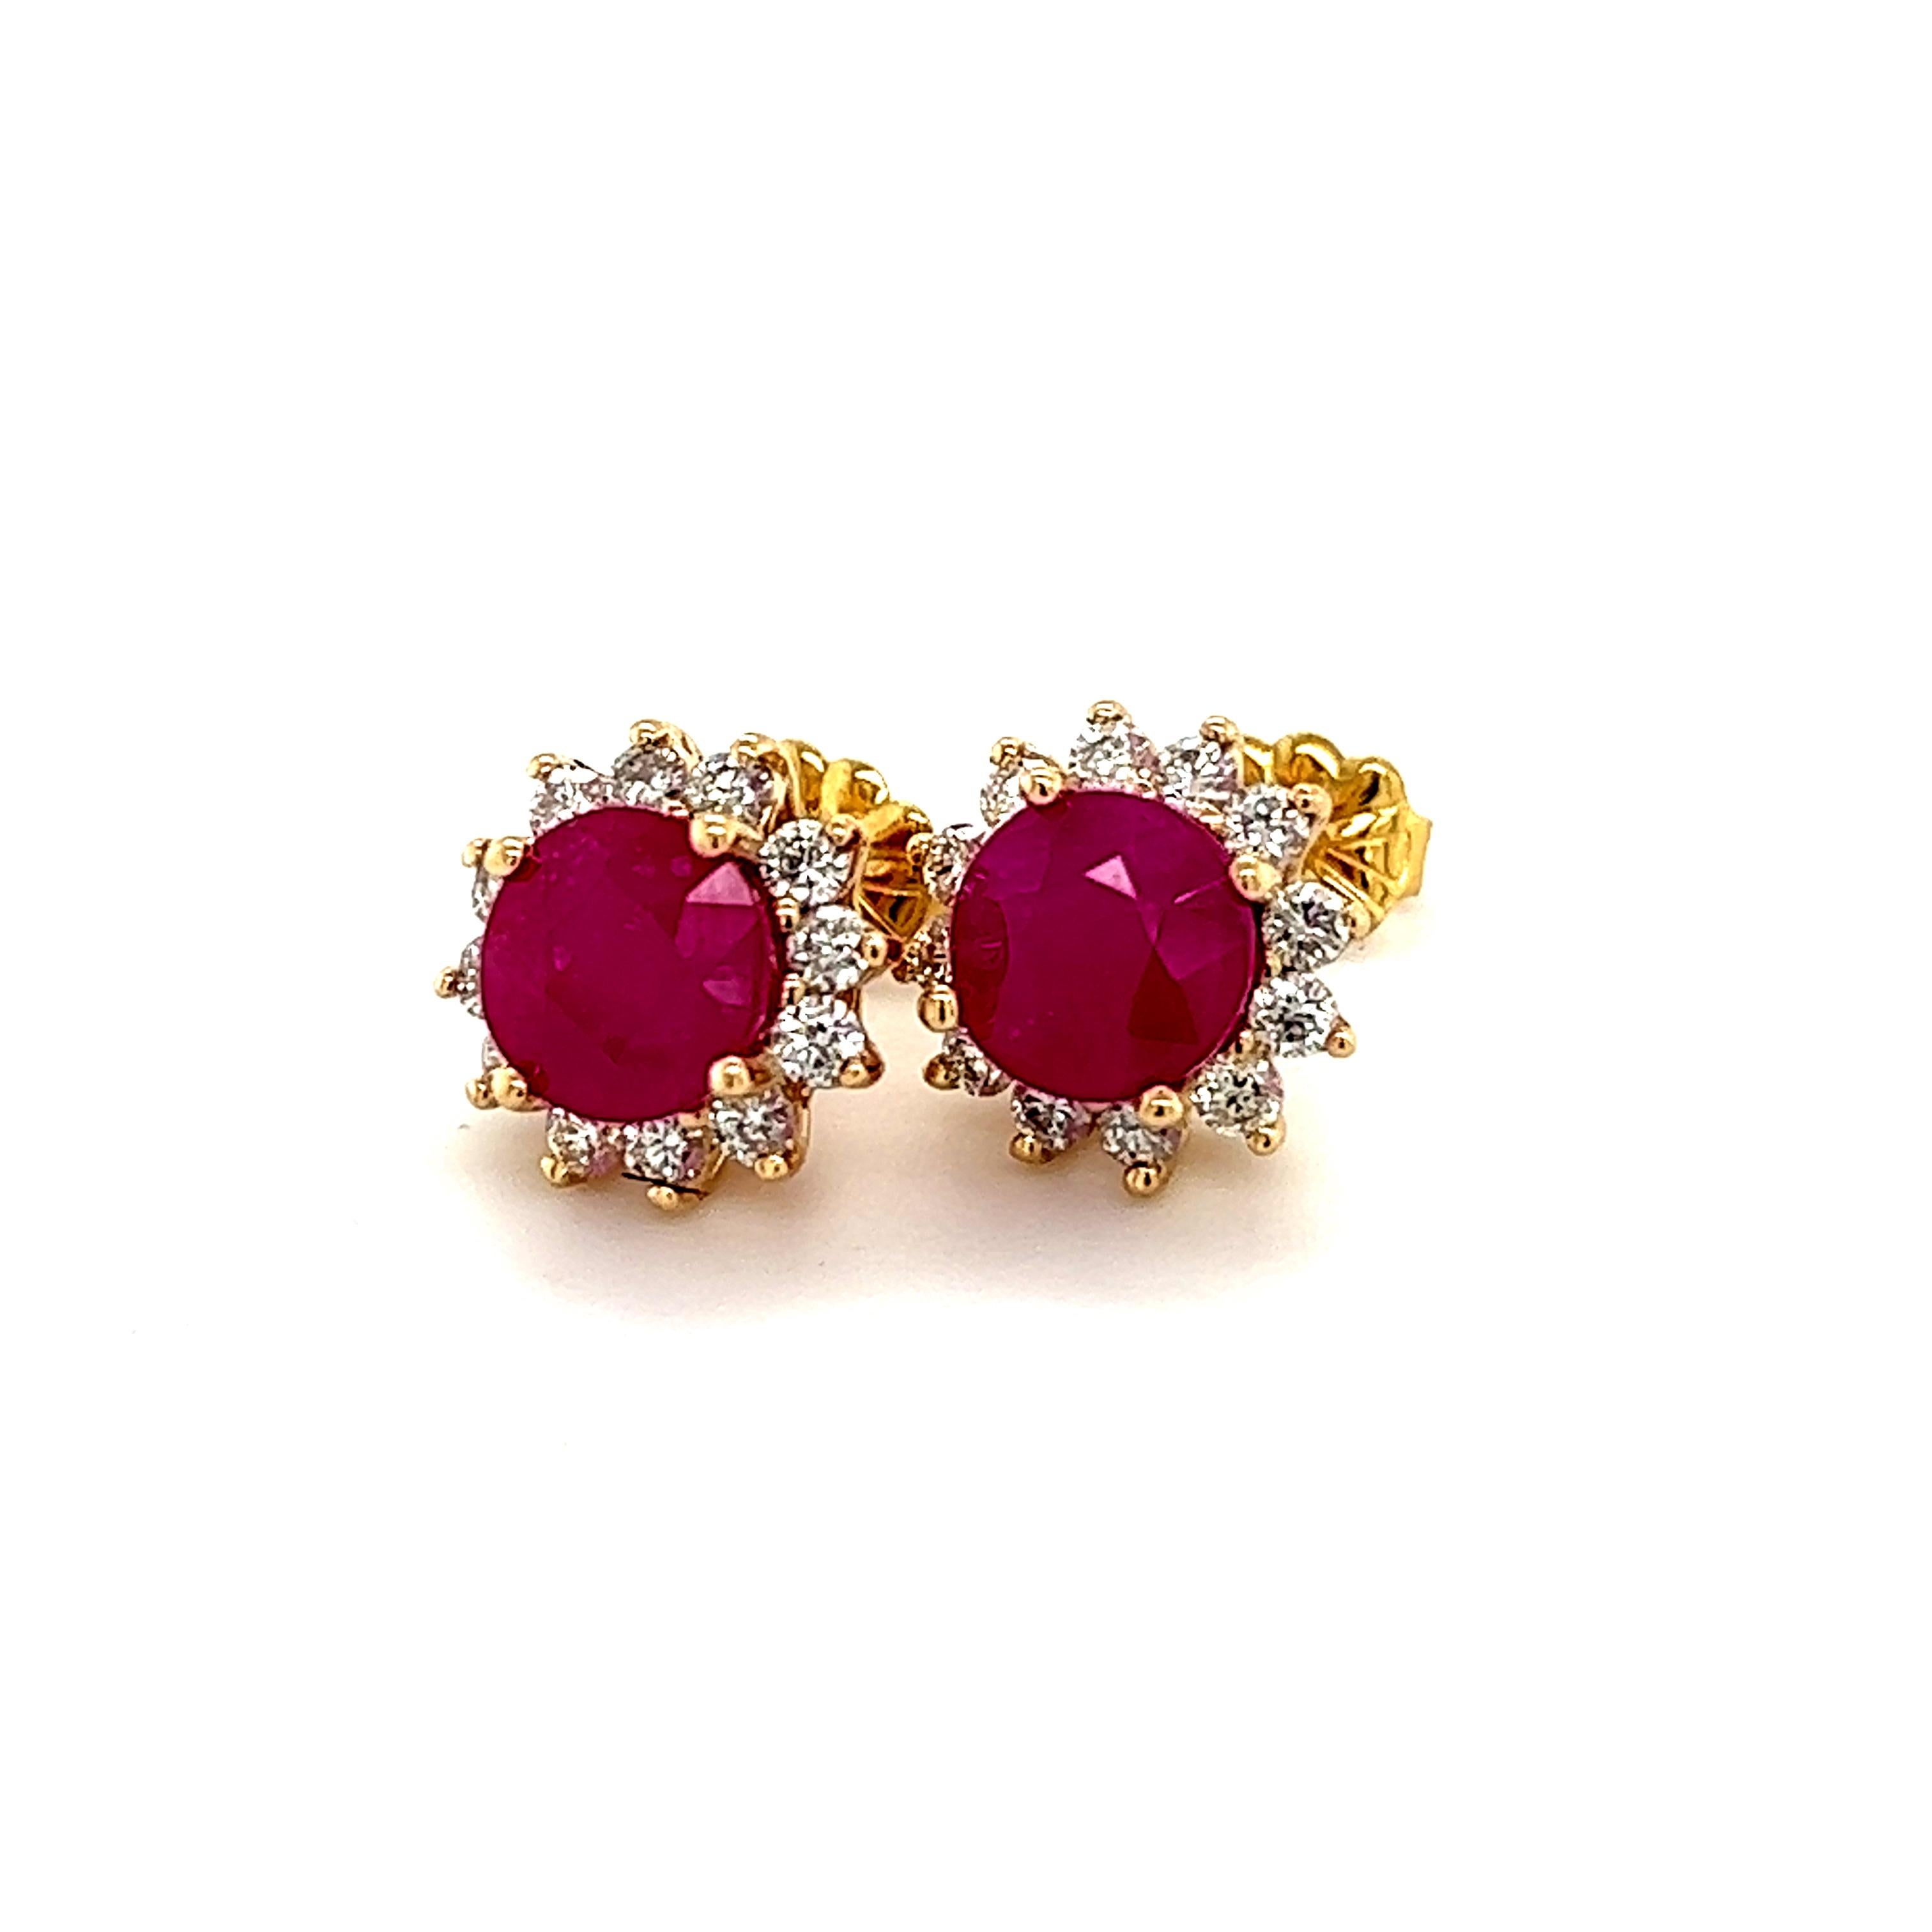 Natural Ruby Diamond Earrings 14k Gold 3.72 TCW Certified For Sale 5